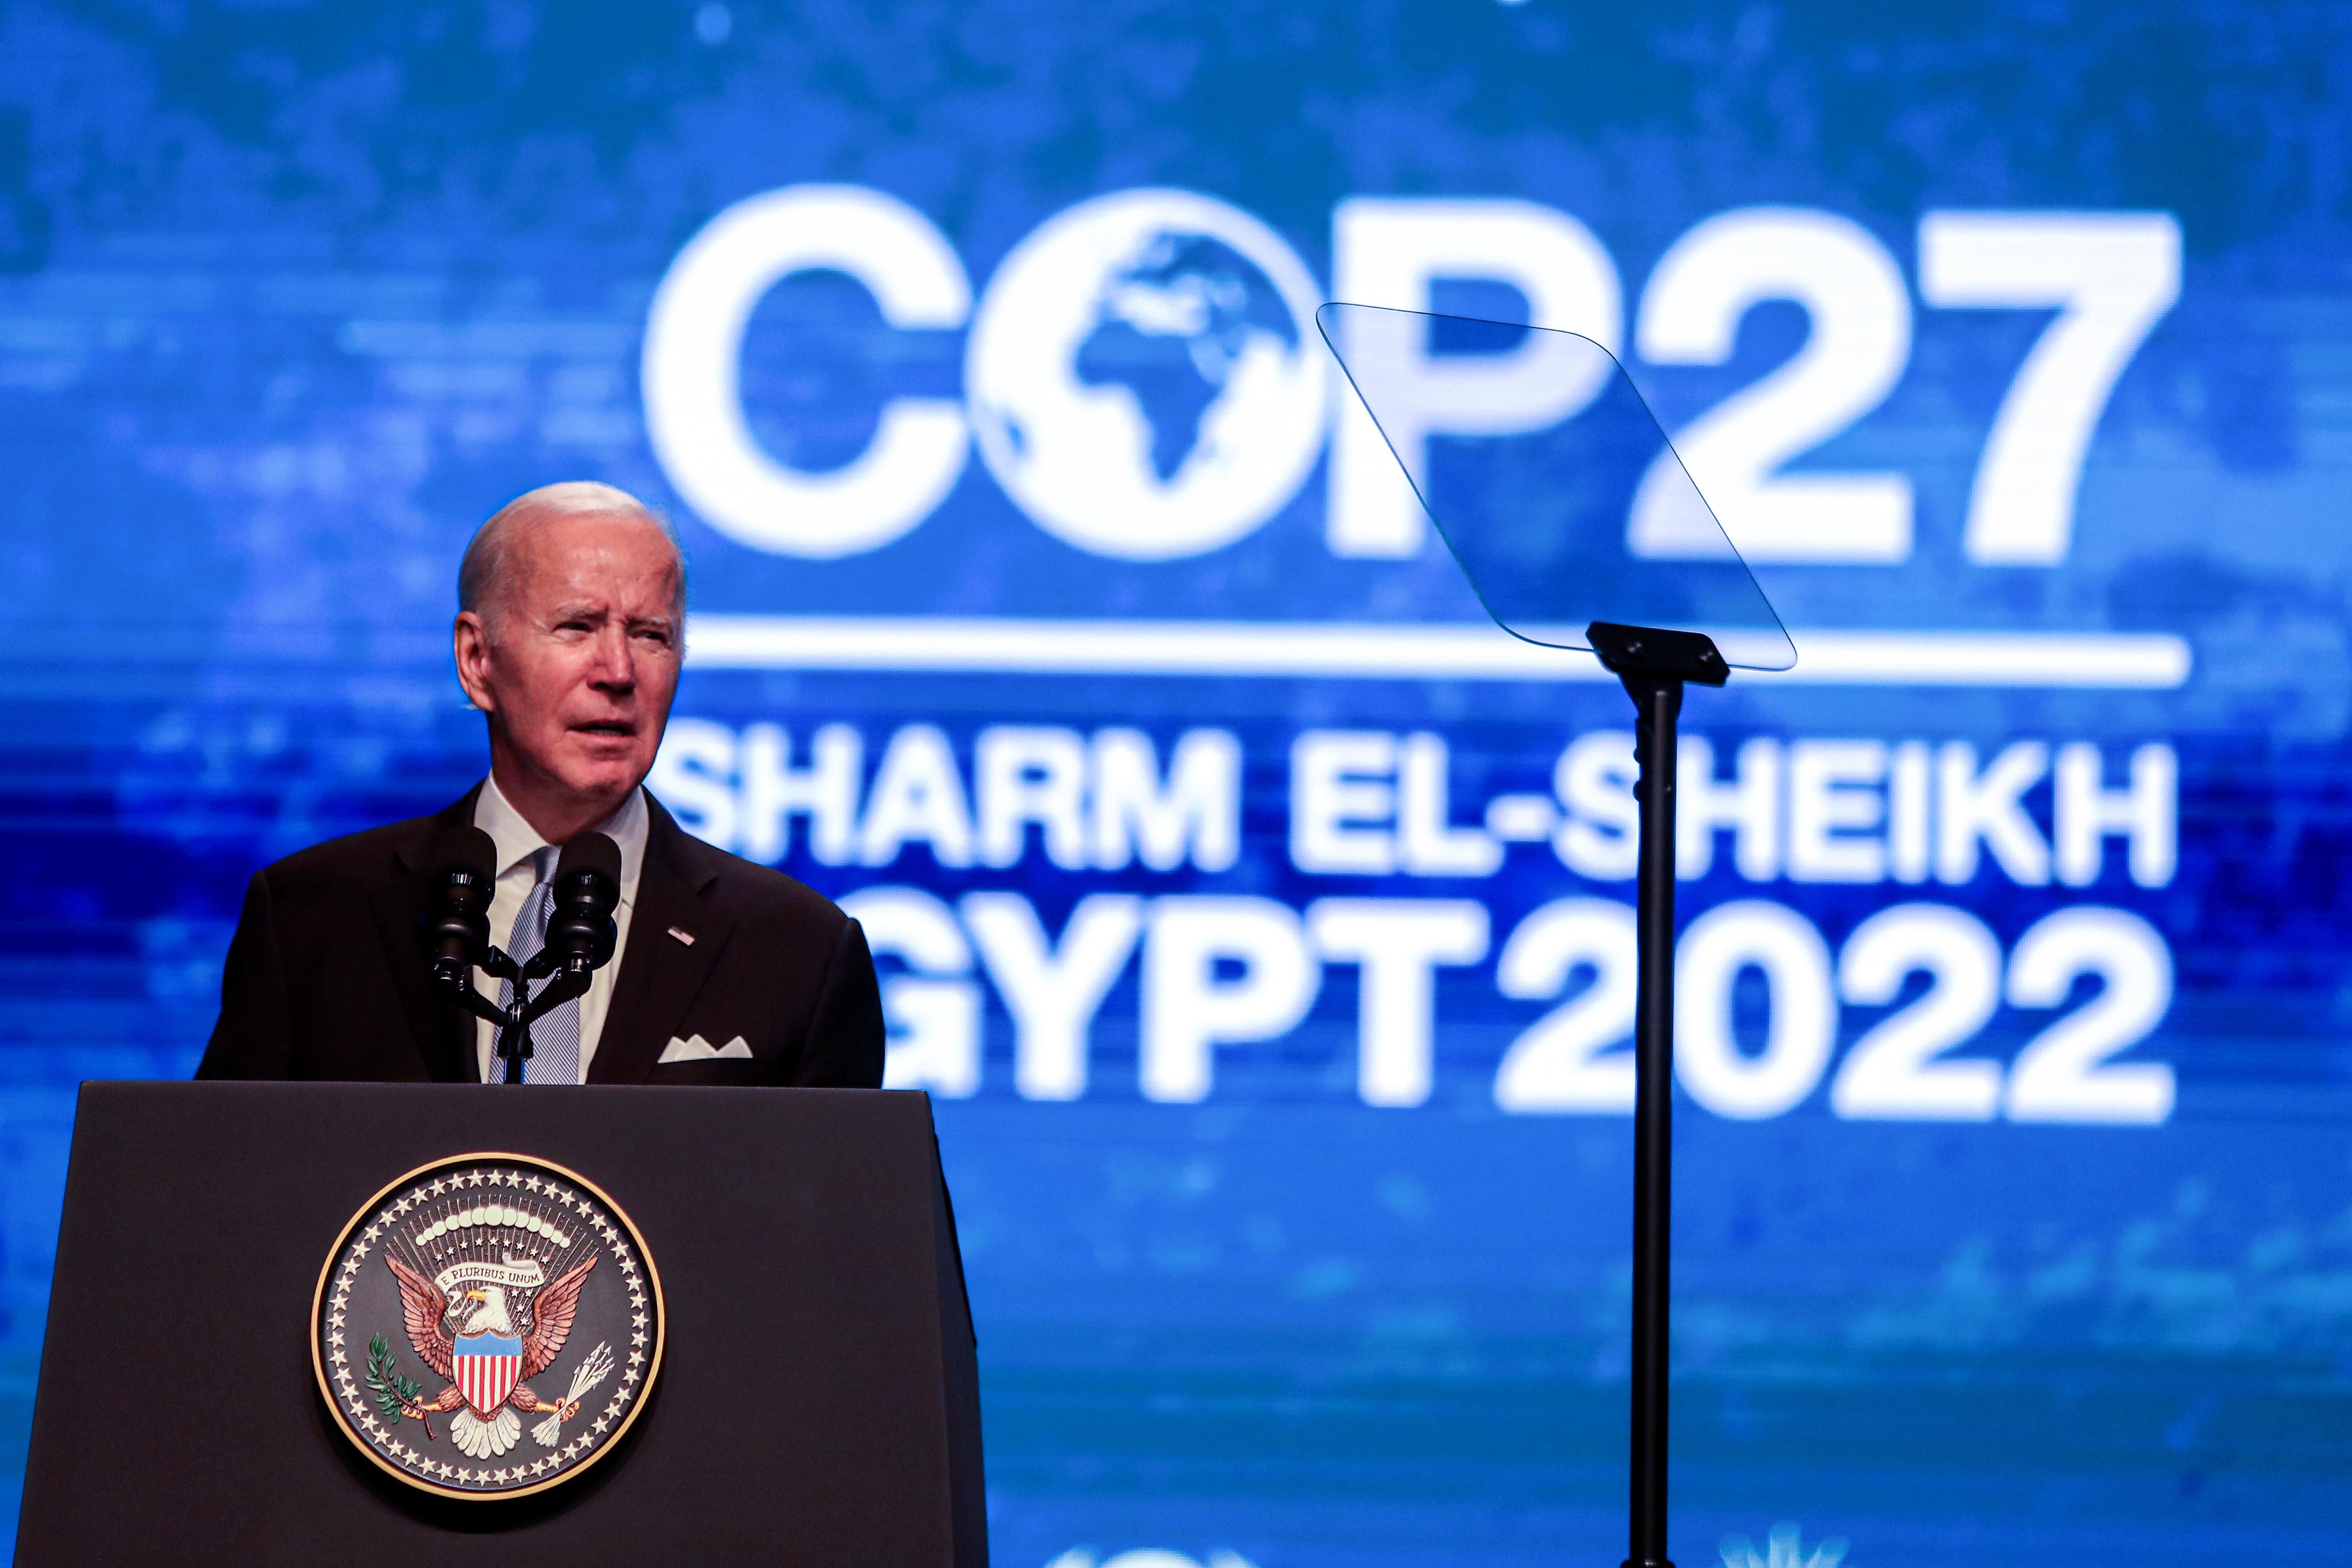 U.S. President Joe Biden delivers a speech during the 2022 United Nations Climate Change Conference in Sharm El-Sheikh, Egypt on November 11, 2022.